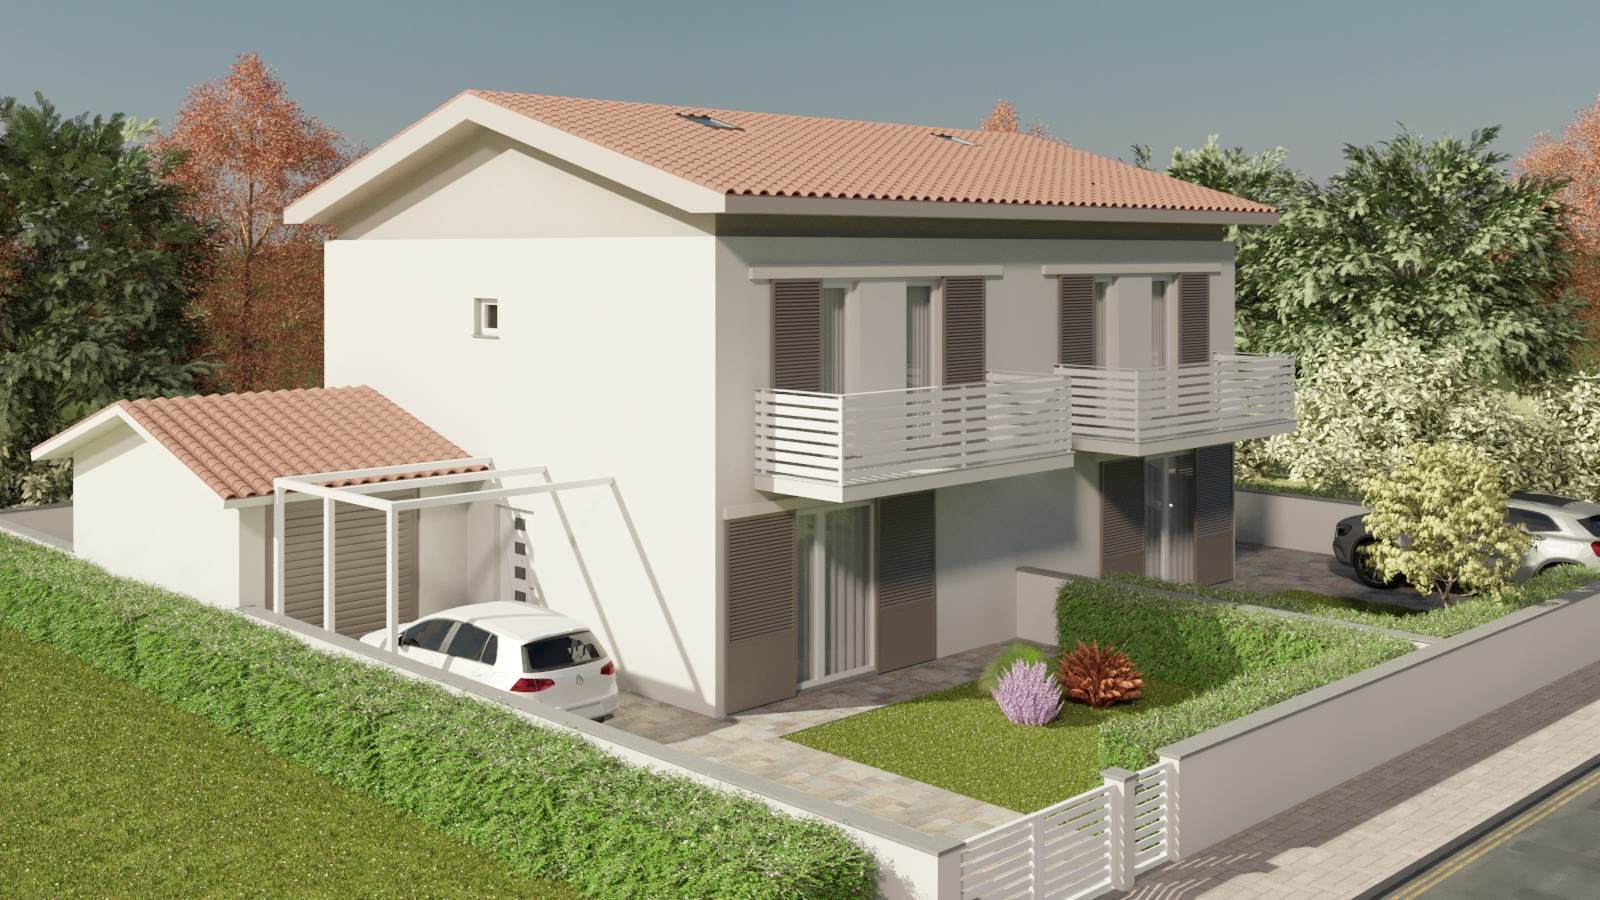 VISIGNANO, CASCINA, Duplex villa for sale of 1 Sq. mt., Energetic class: A+, Epi: 100 kwh/m2 year, composed by: 1 Room, Price: € 1